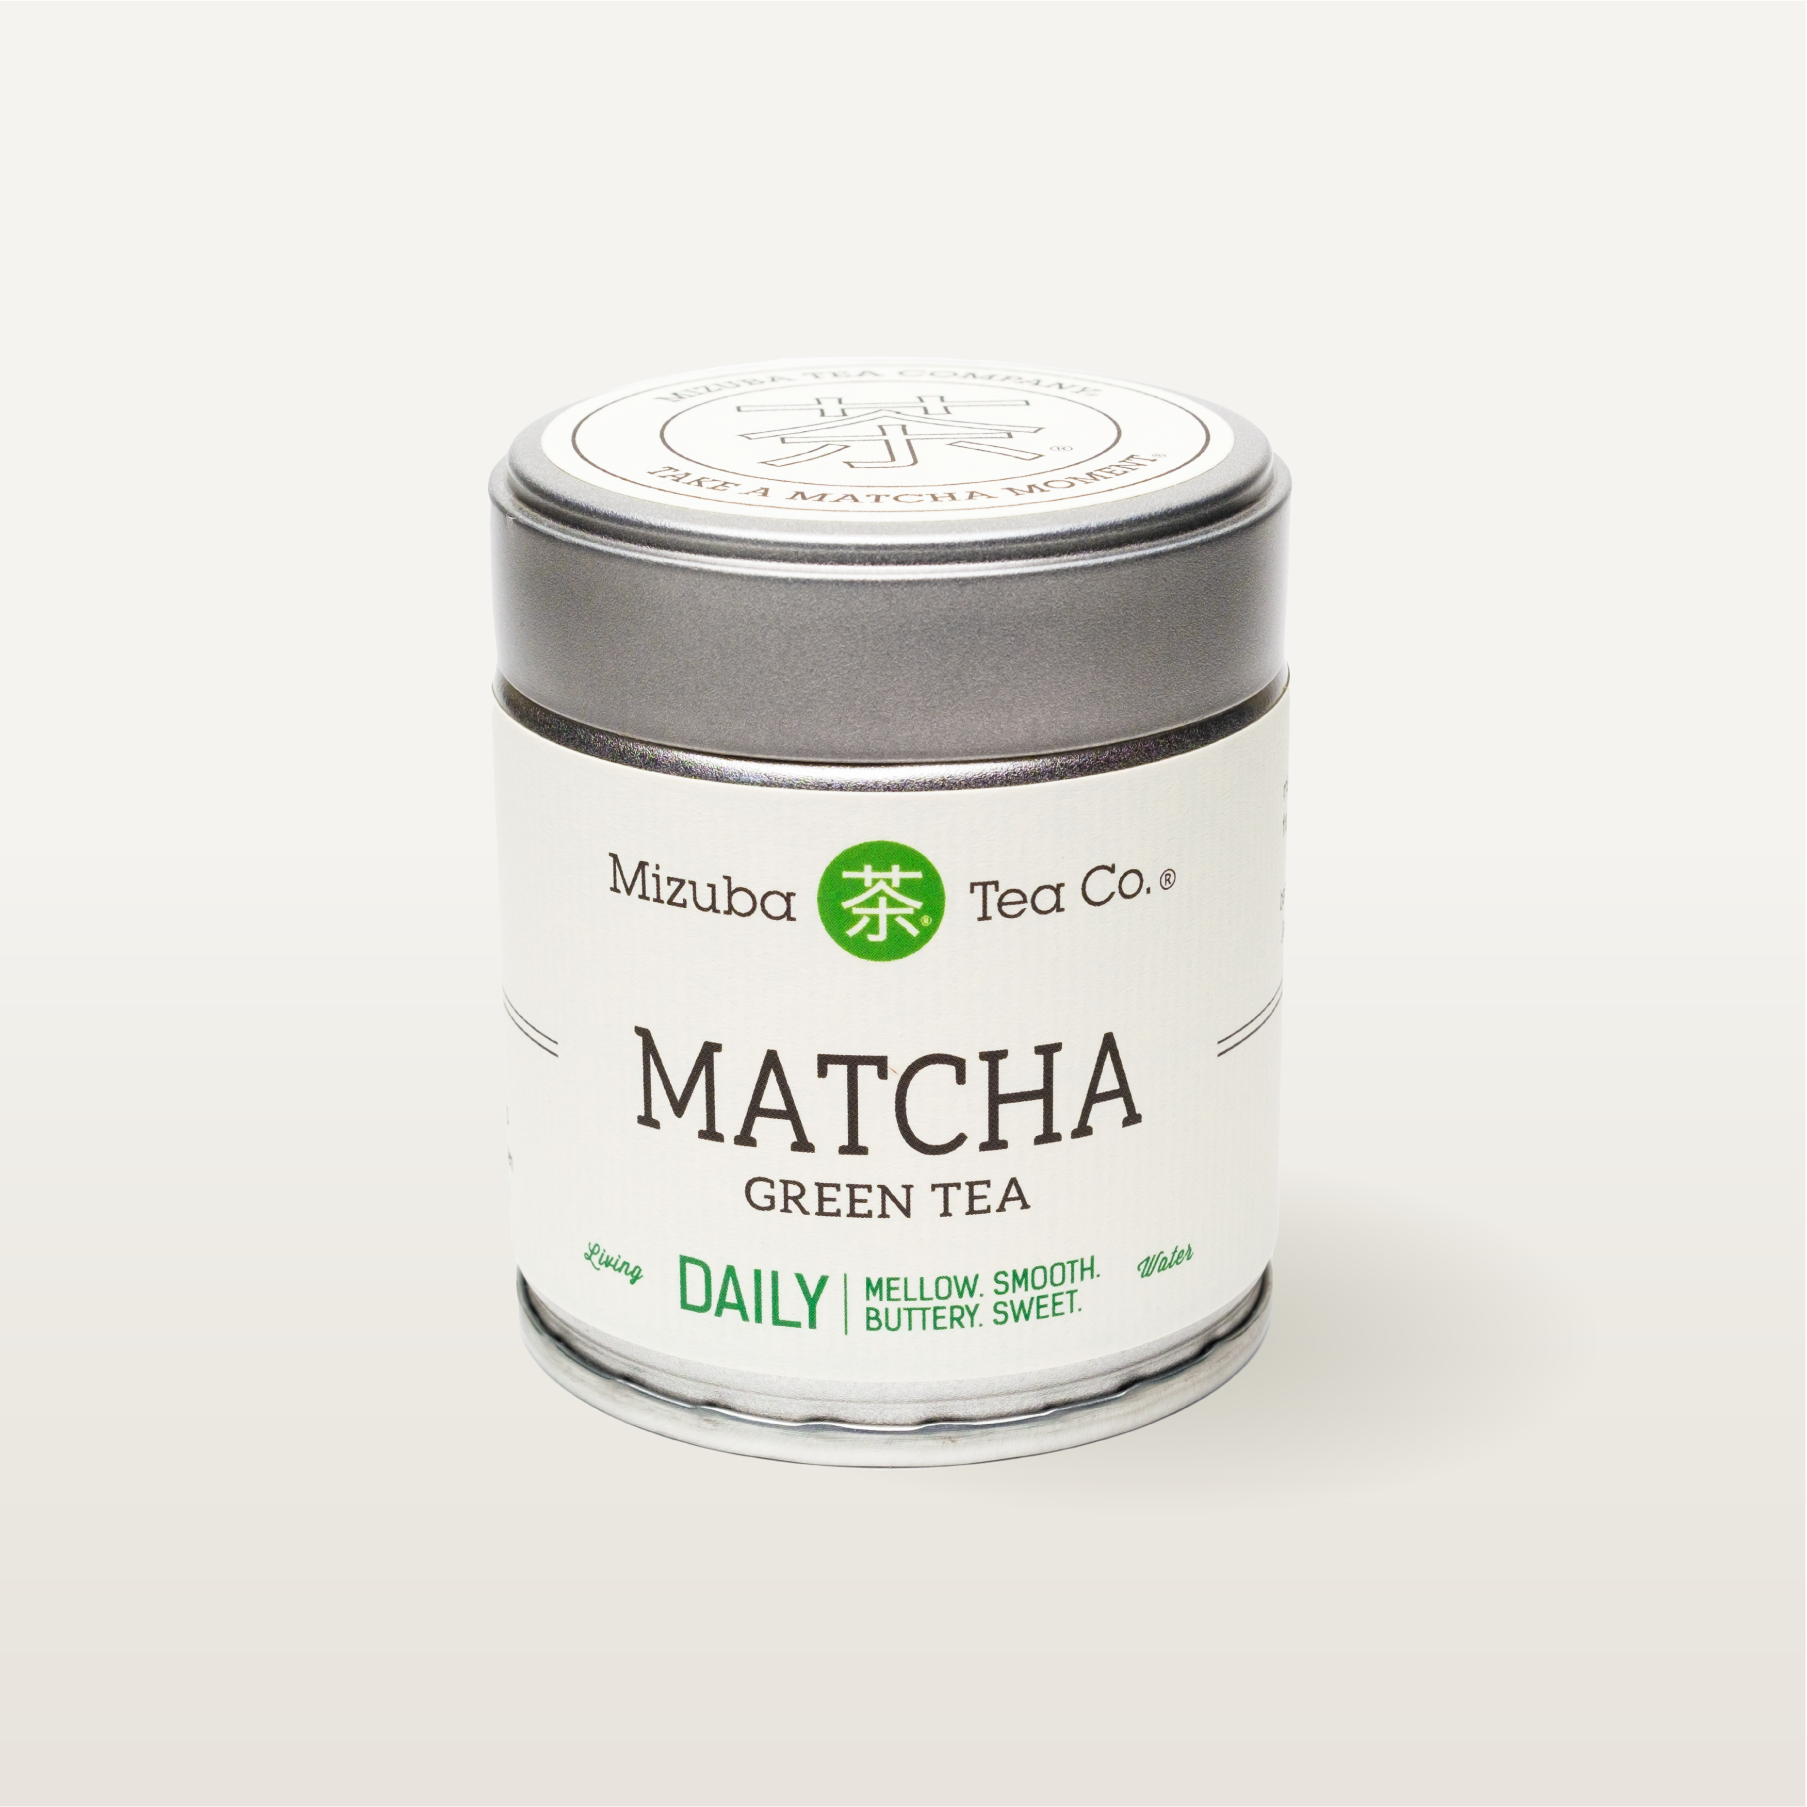 Matcha: Benefits and Opportunities to Consider in 2023